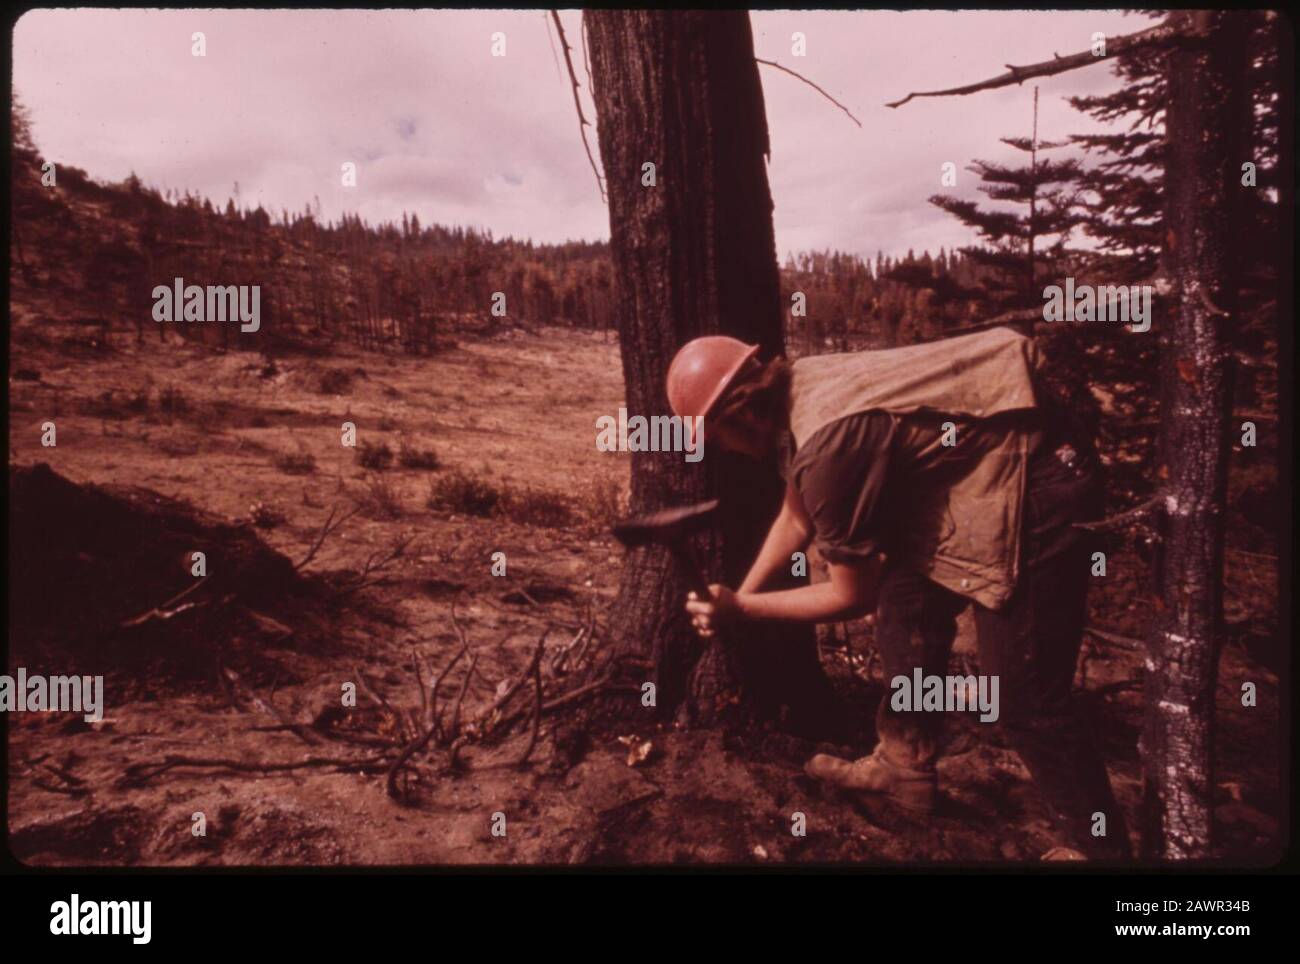 Forester-Chips-Base-of-Tree-to-inspect-cambium-a-protective-Layer-between-bark-and-inner-wood-if-this-is-havarged-Tree-cannot-survive-and-will-be-marked-to-Cut-september-1973 7007049562 o. Stockfoto